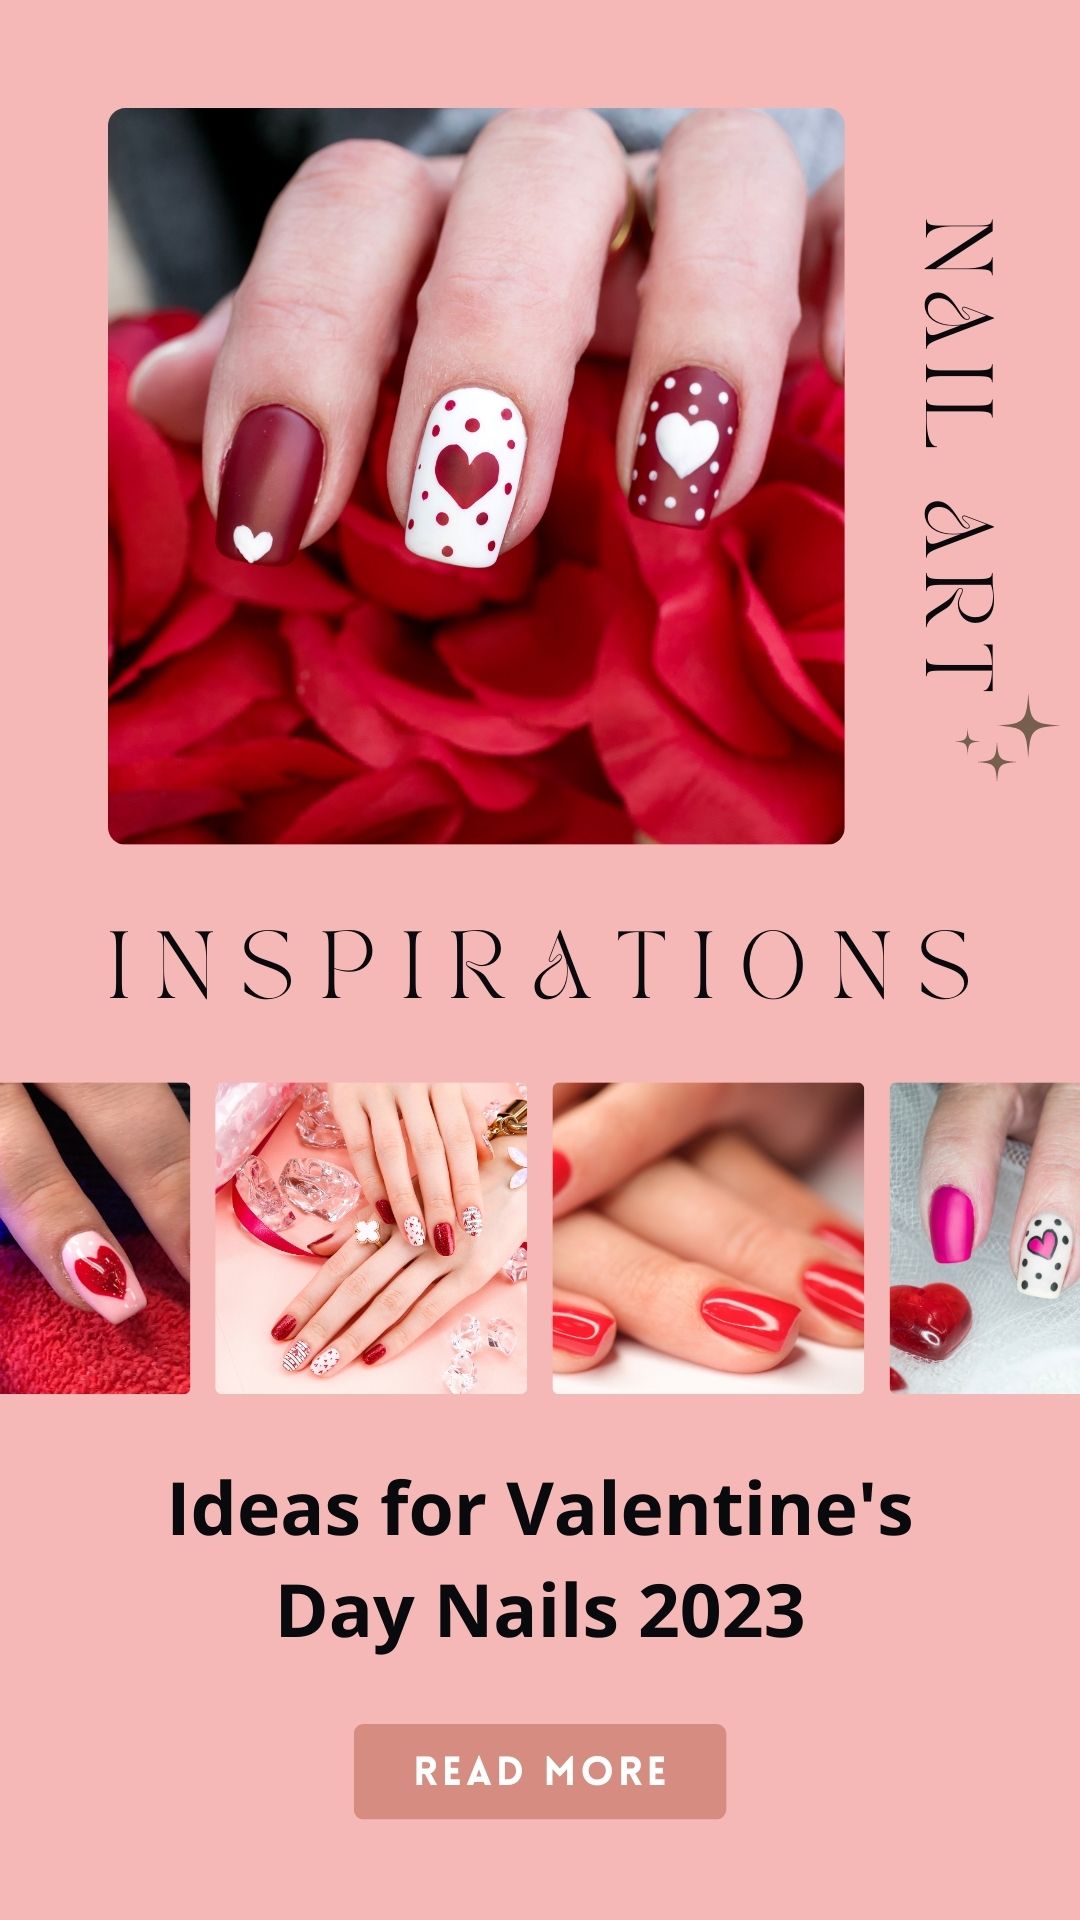 Ideas for Valentines Nails 2023